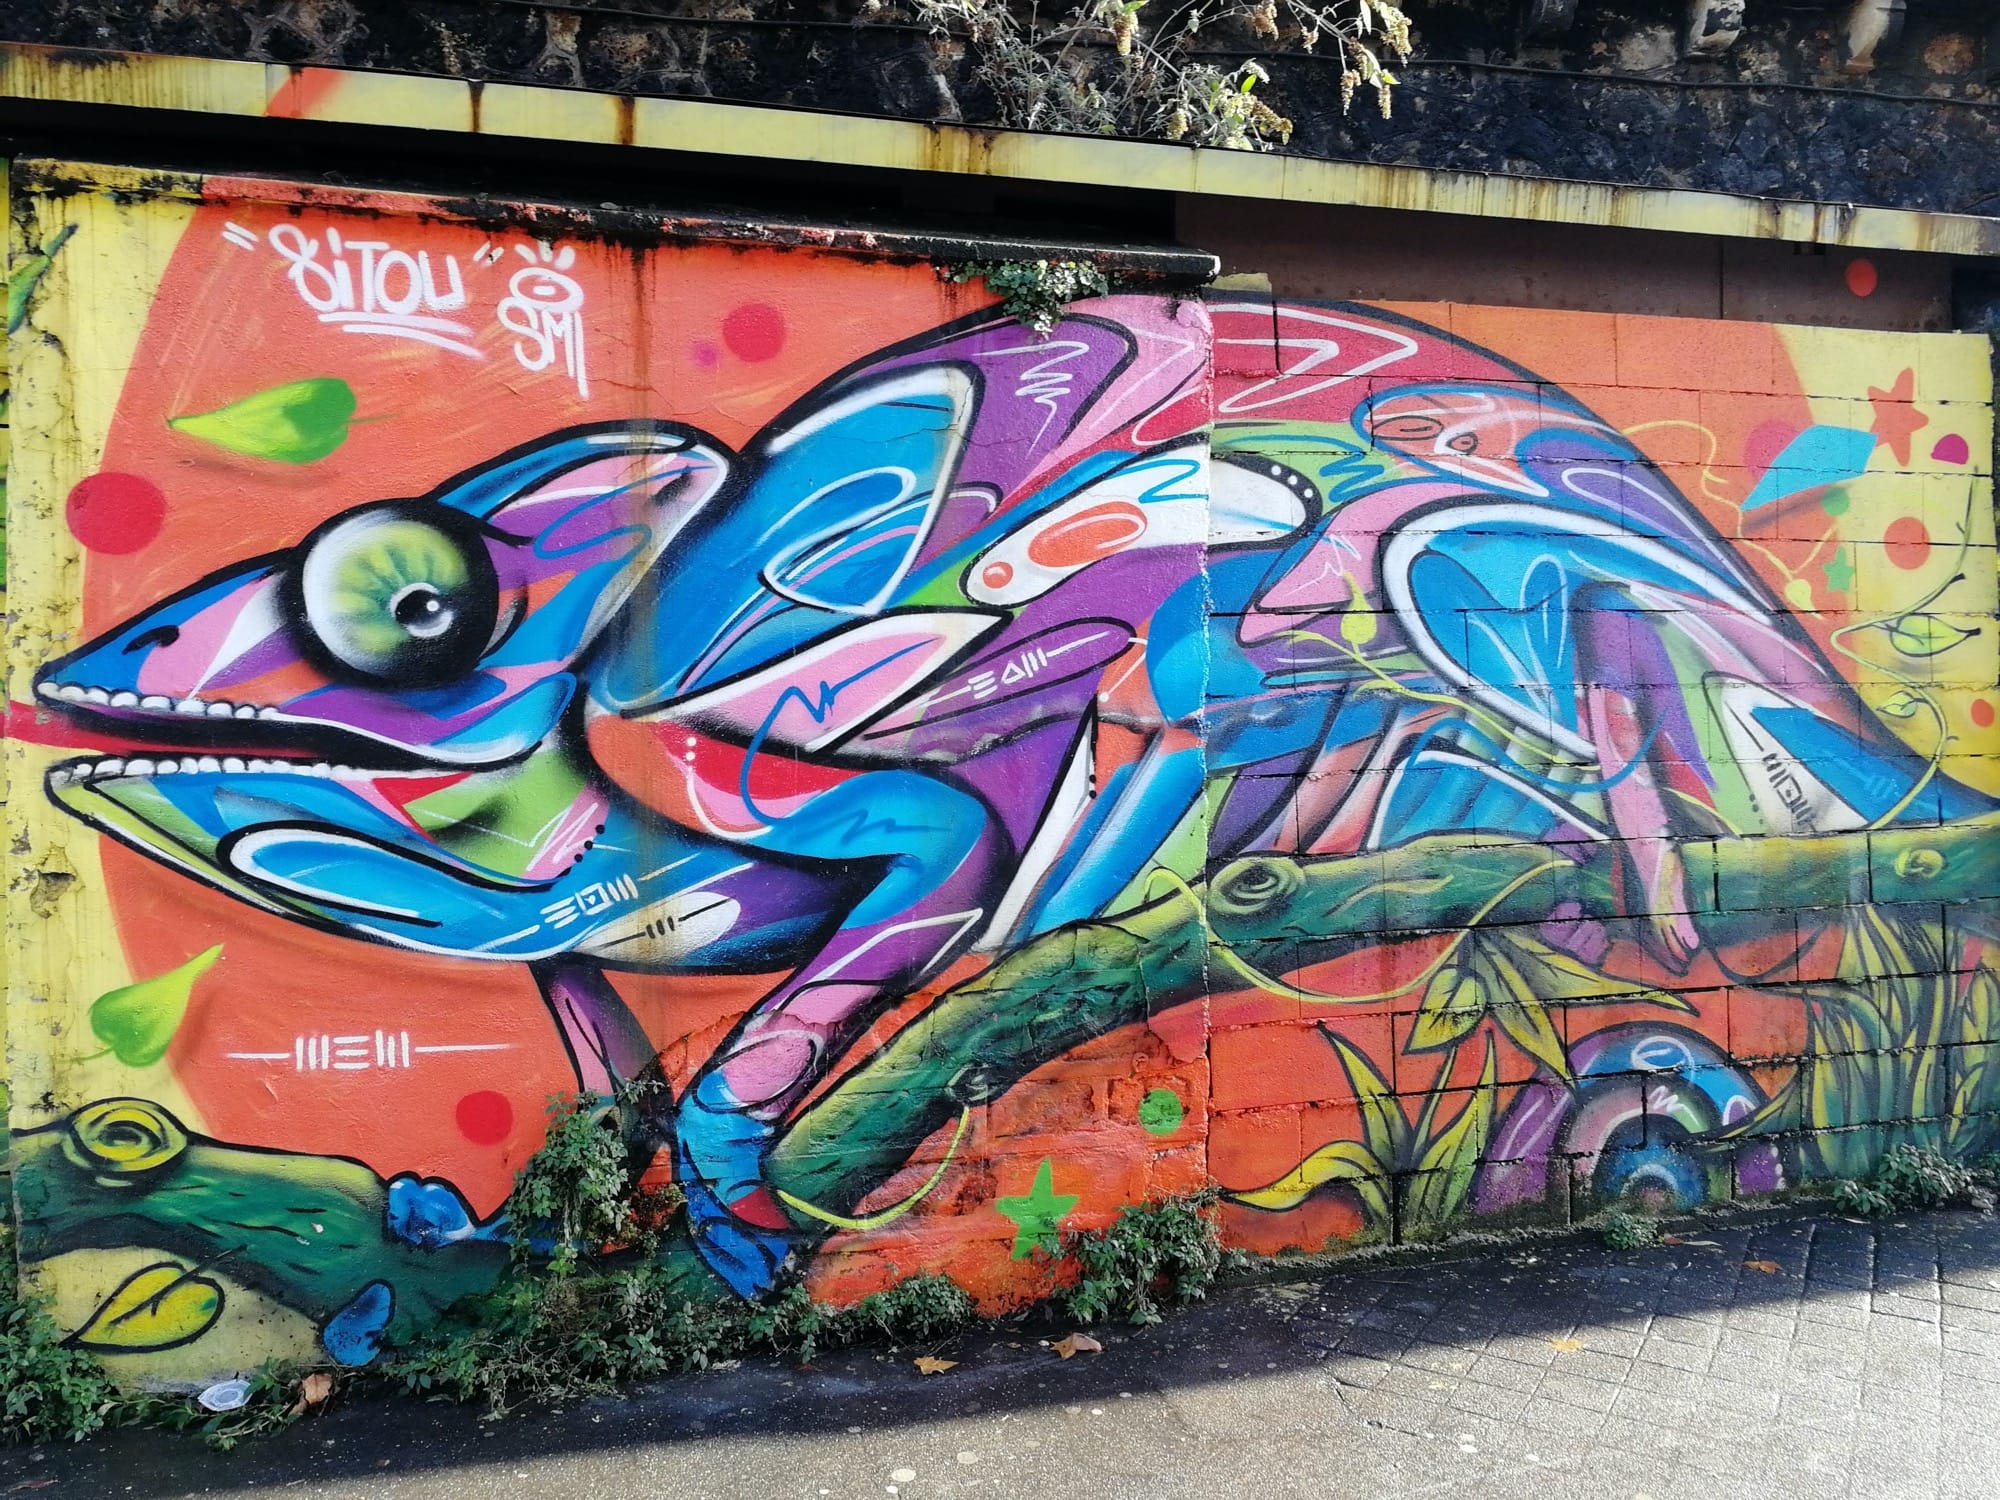 Graffiti 535 Caméléon by the artist Sitou captured by Rabot in Paris France